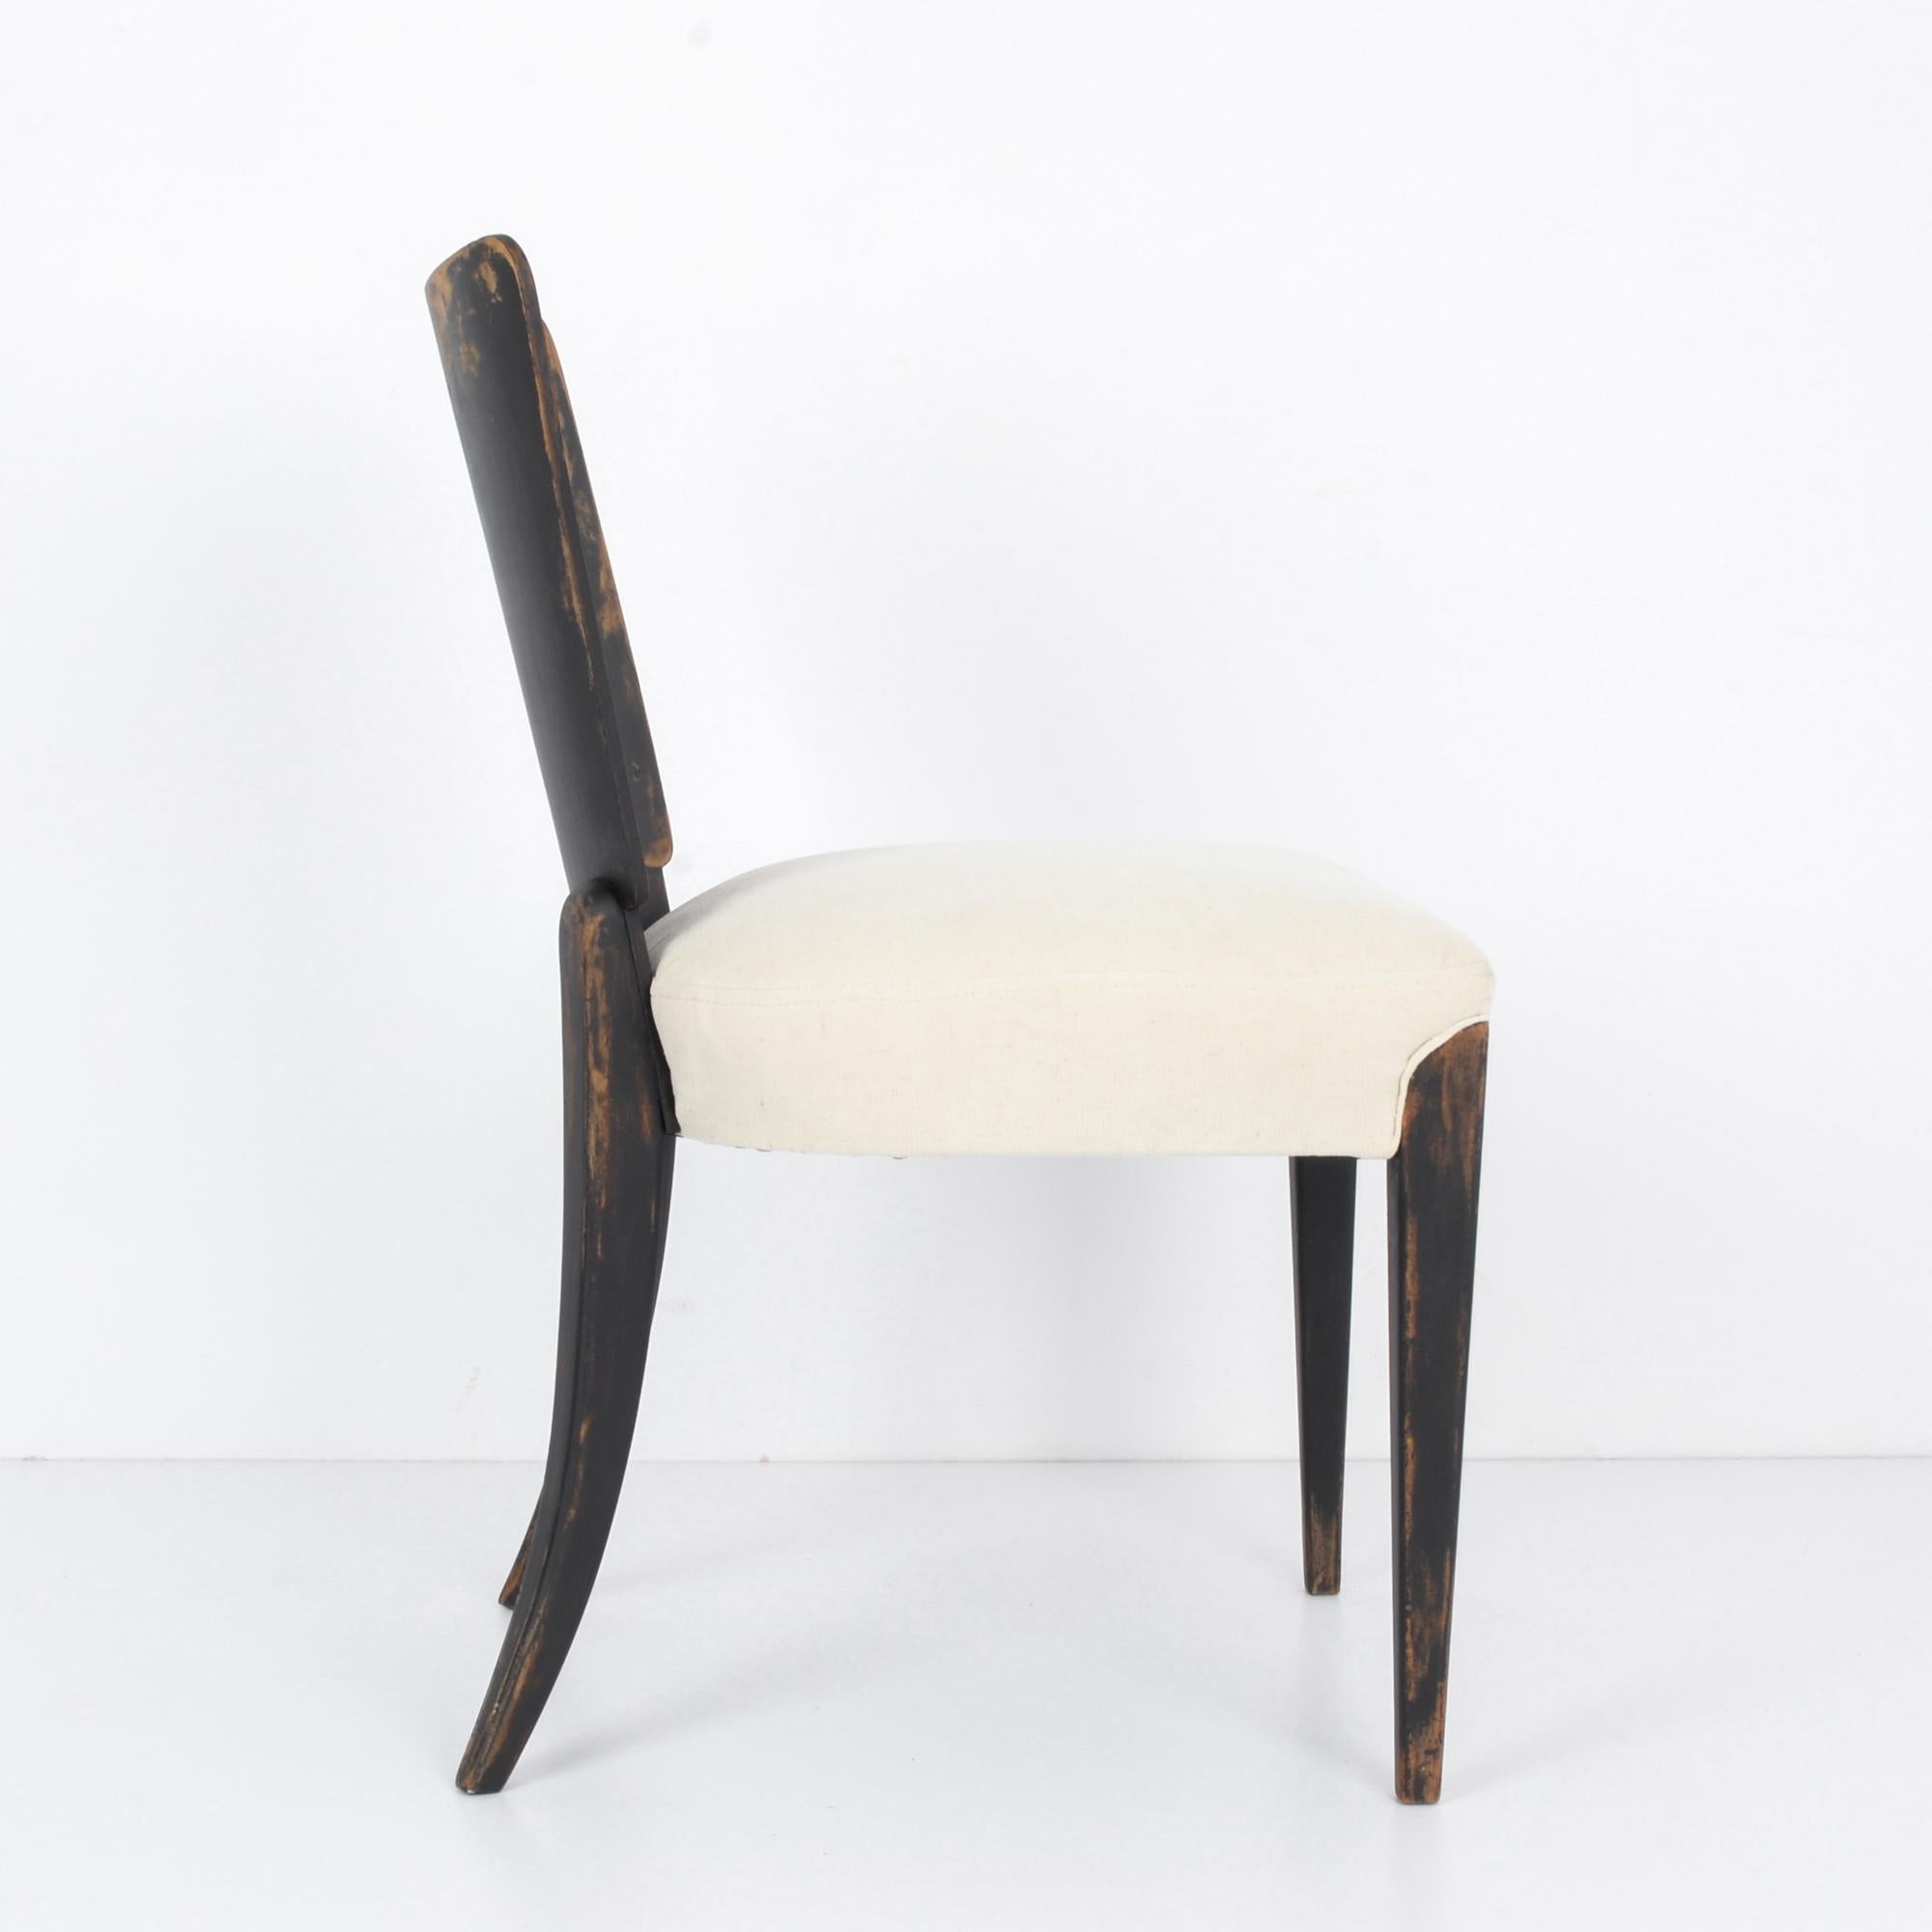 Czech Wooden Chair with Upholstered Seat by J. Halabala